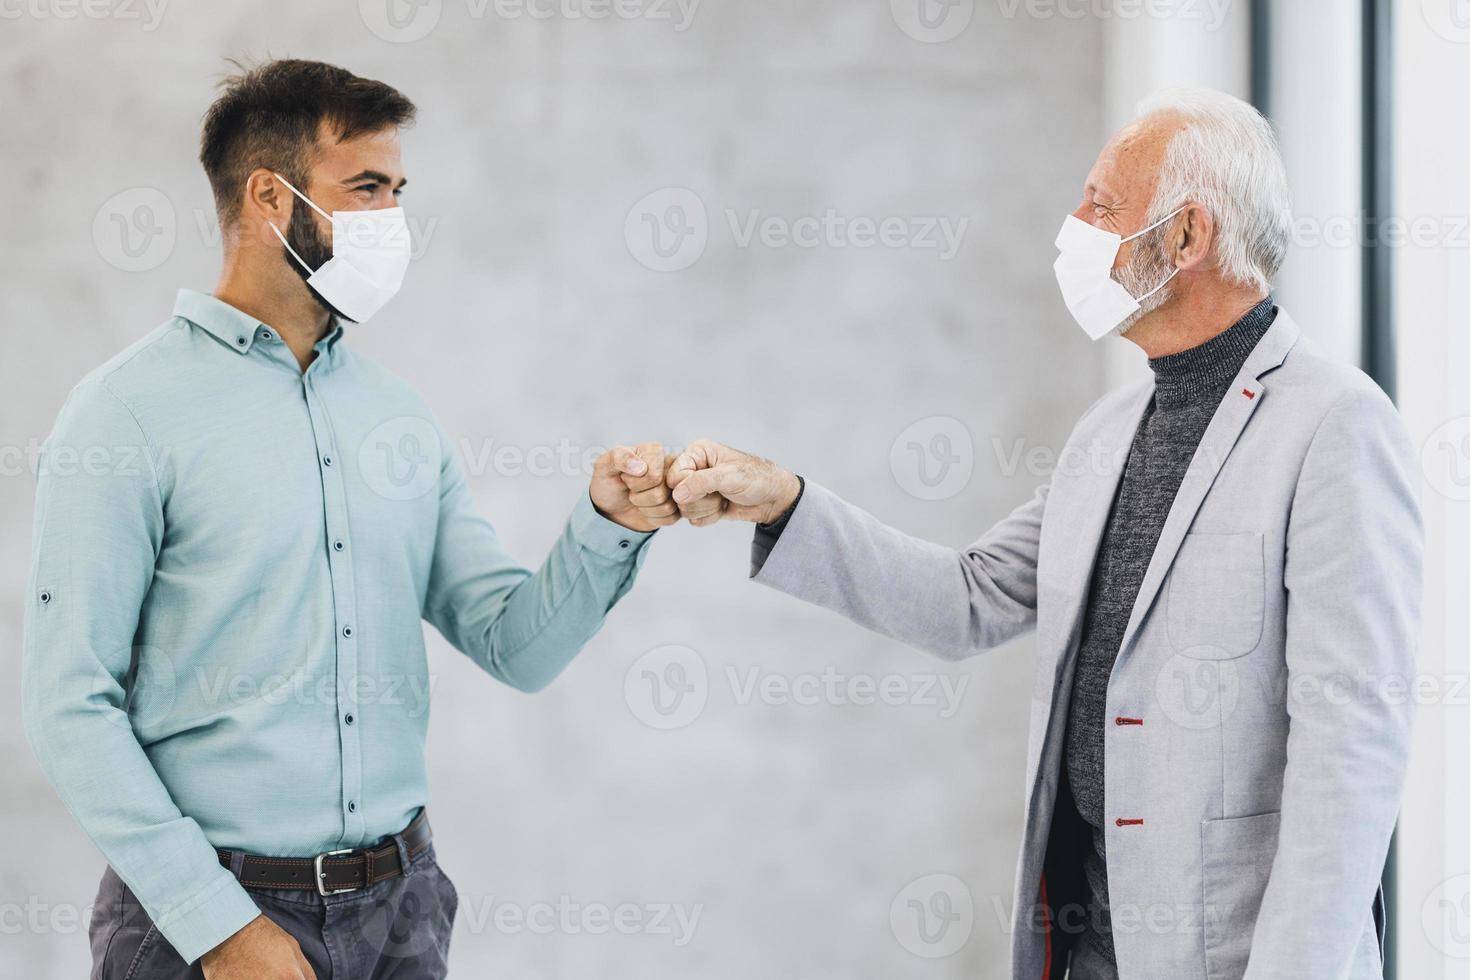 Two Business Man Greeting With Bumping Fists During Coronavirus Pandemic In The Office photo